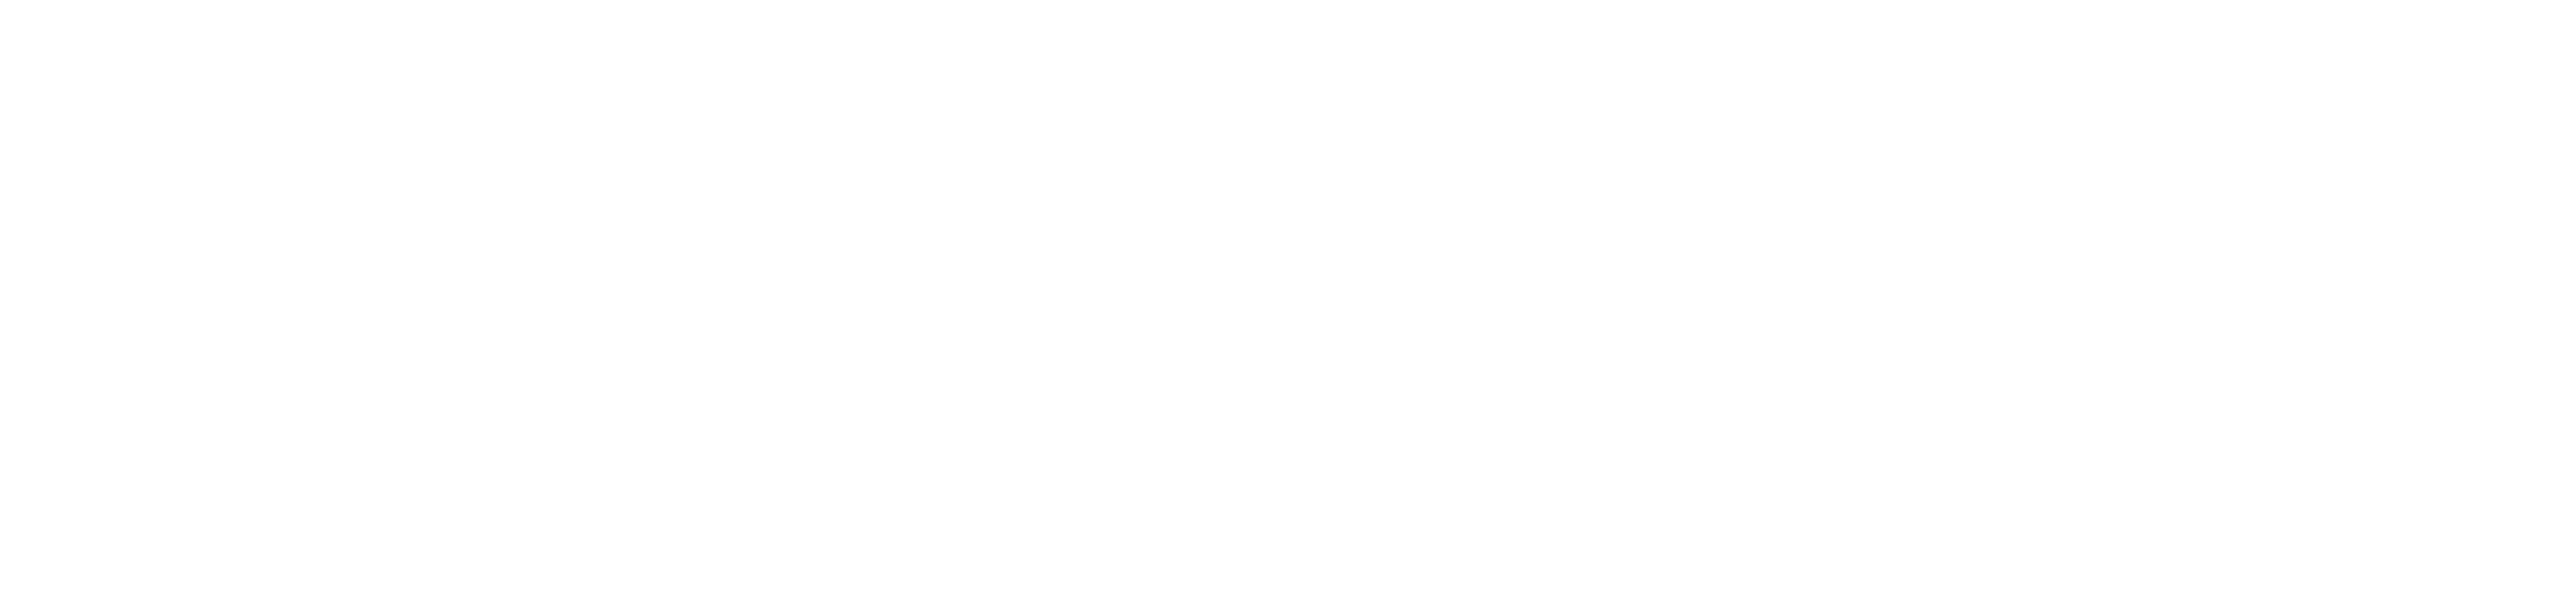 Cross Sectional Tanker View